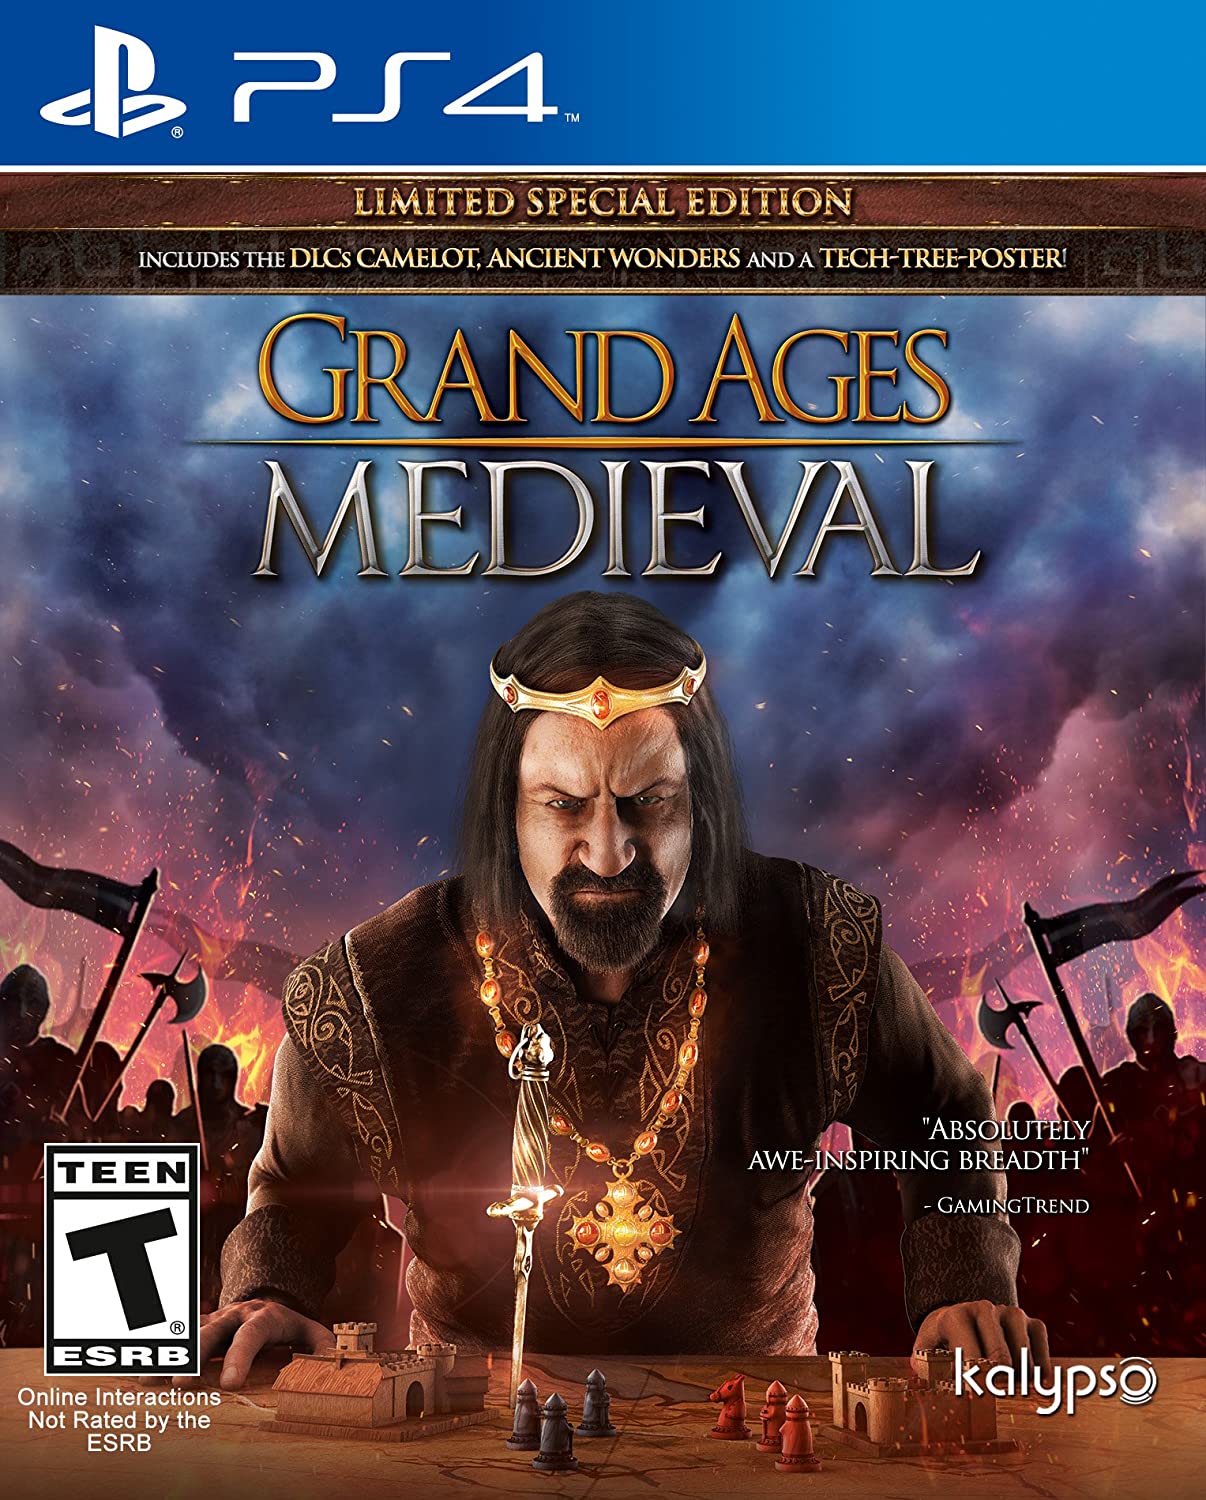 Grand Ages Medieval - PC